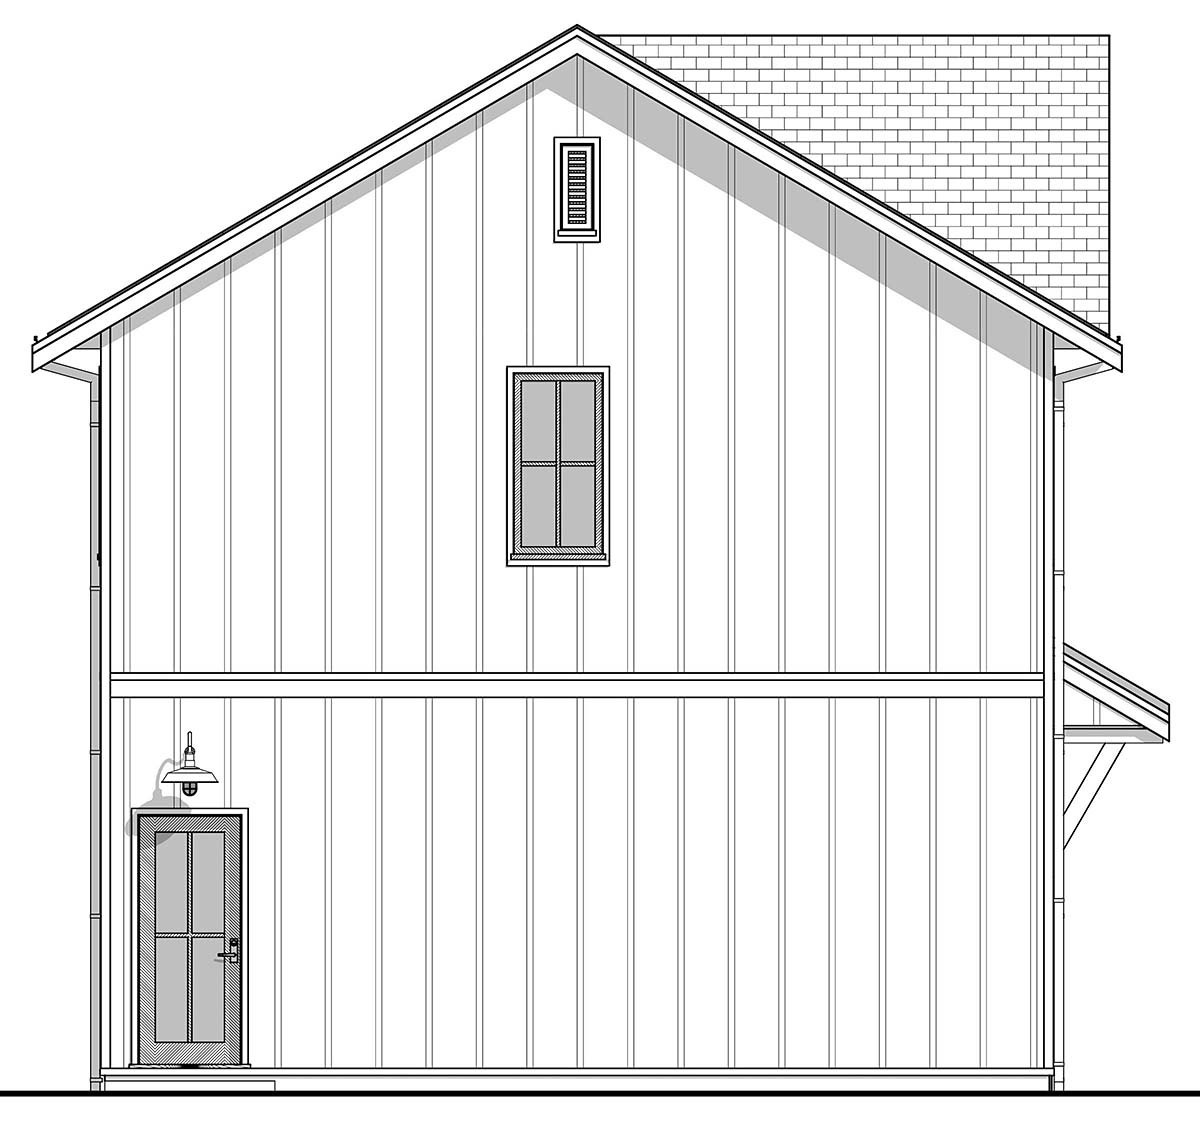 Cottage, Country, Farmhouse, Traditional Plan with 899 Sq. Ft., 2 Bedrooms, 2 Bathrooms, 3 Car Garage Picture 3